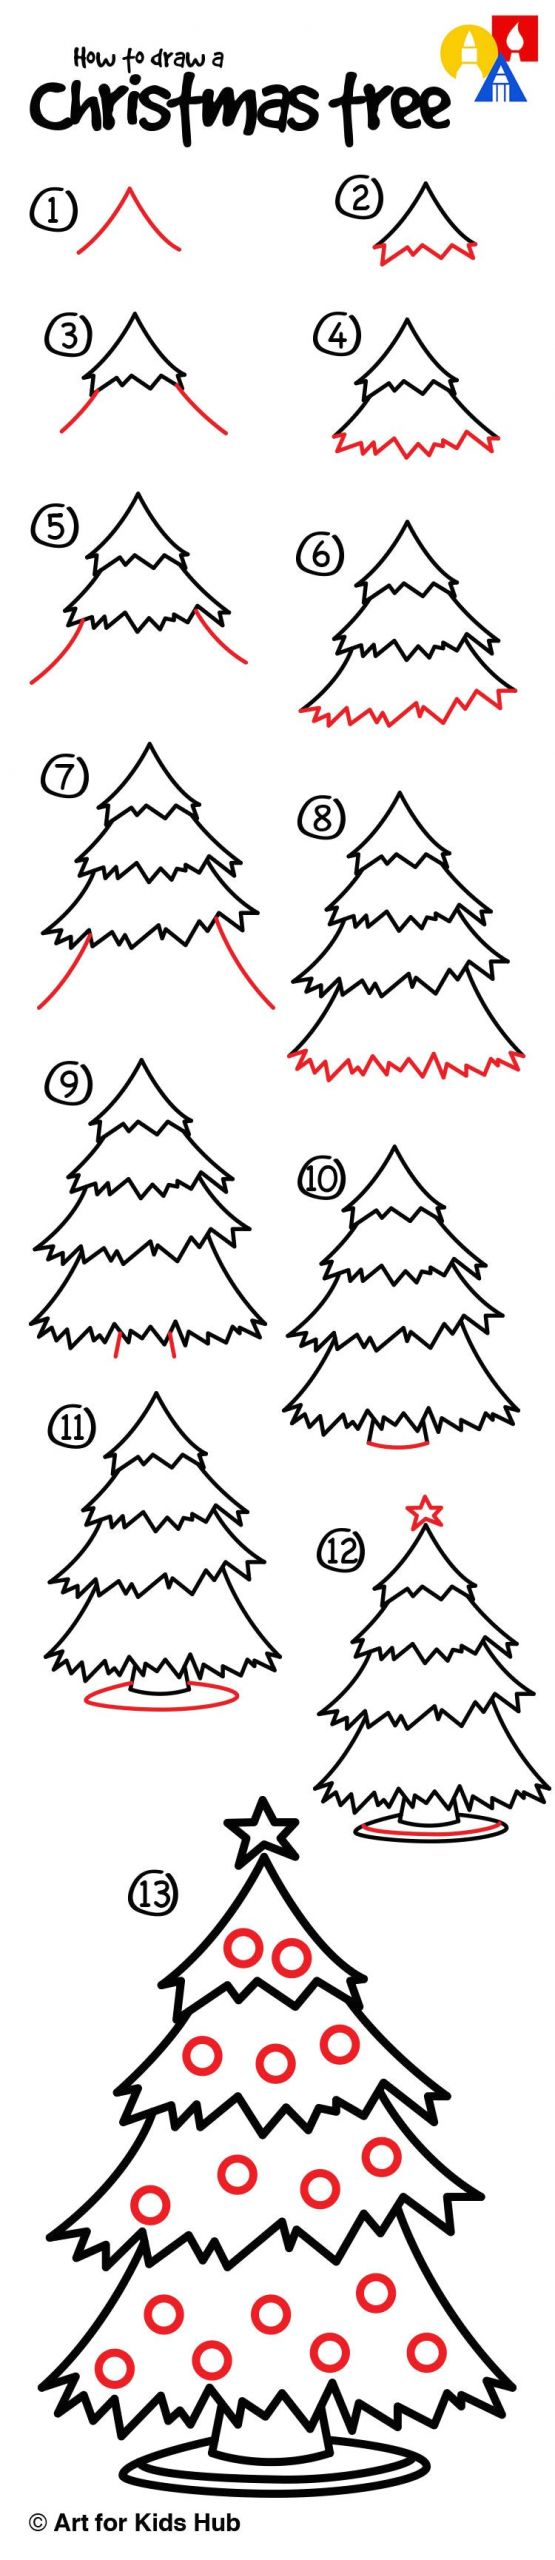 Cute Christmas Drawings Easy Step by Step How to Draw A Christmas Tree Art for Kids Hub Art for